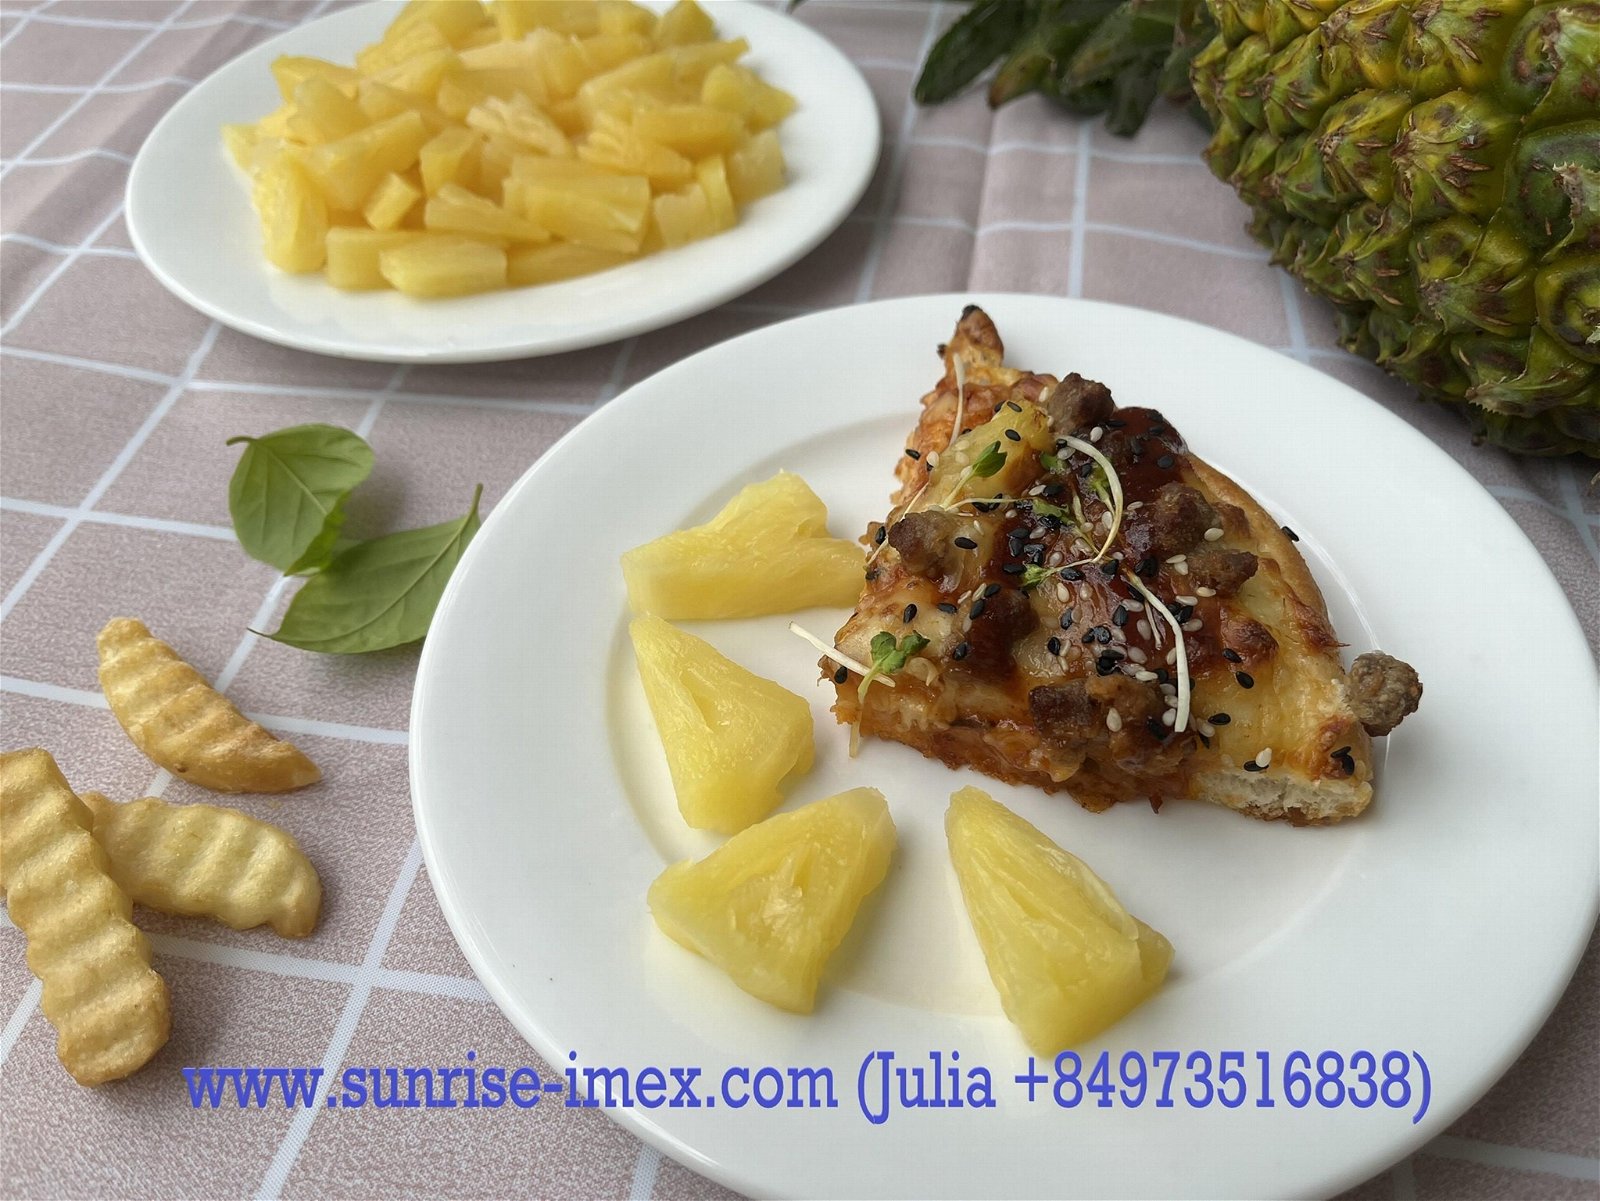 Canned pineapple/ ananas/ нанасы in slice/tibdits/pizza cut  2